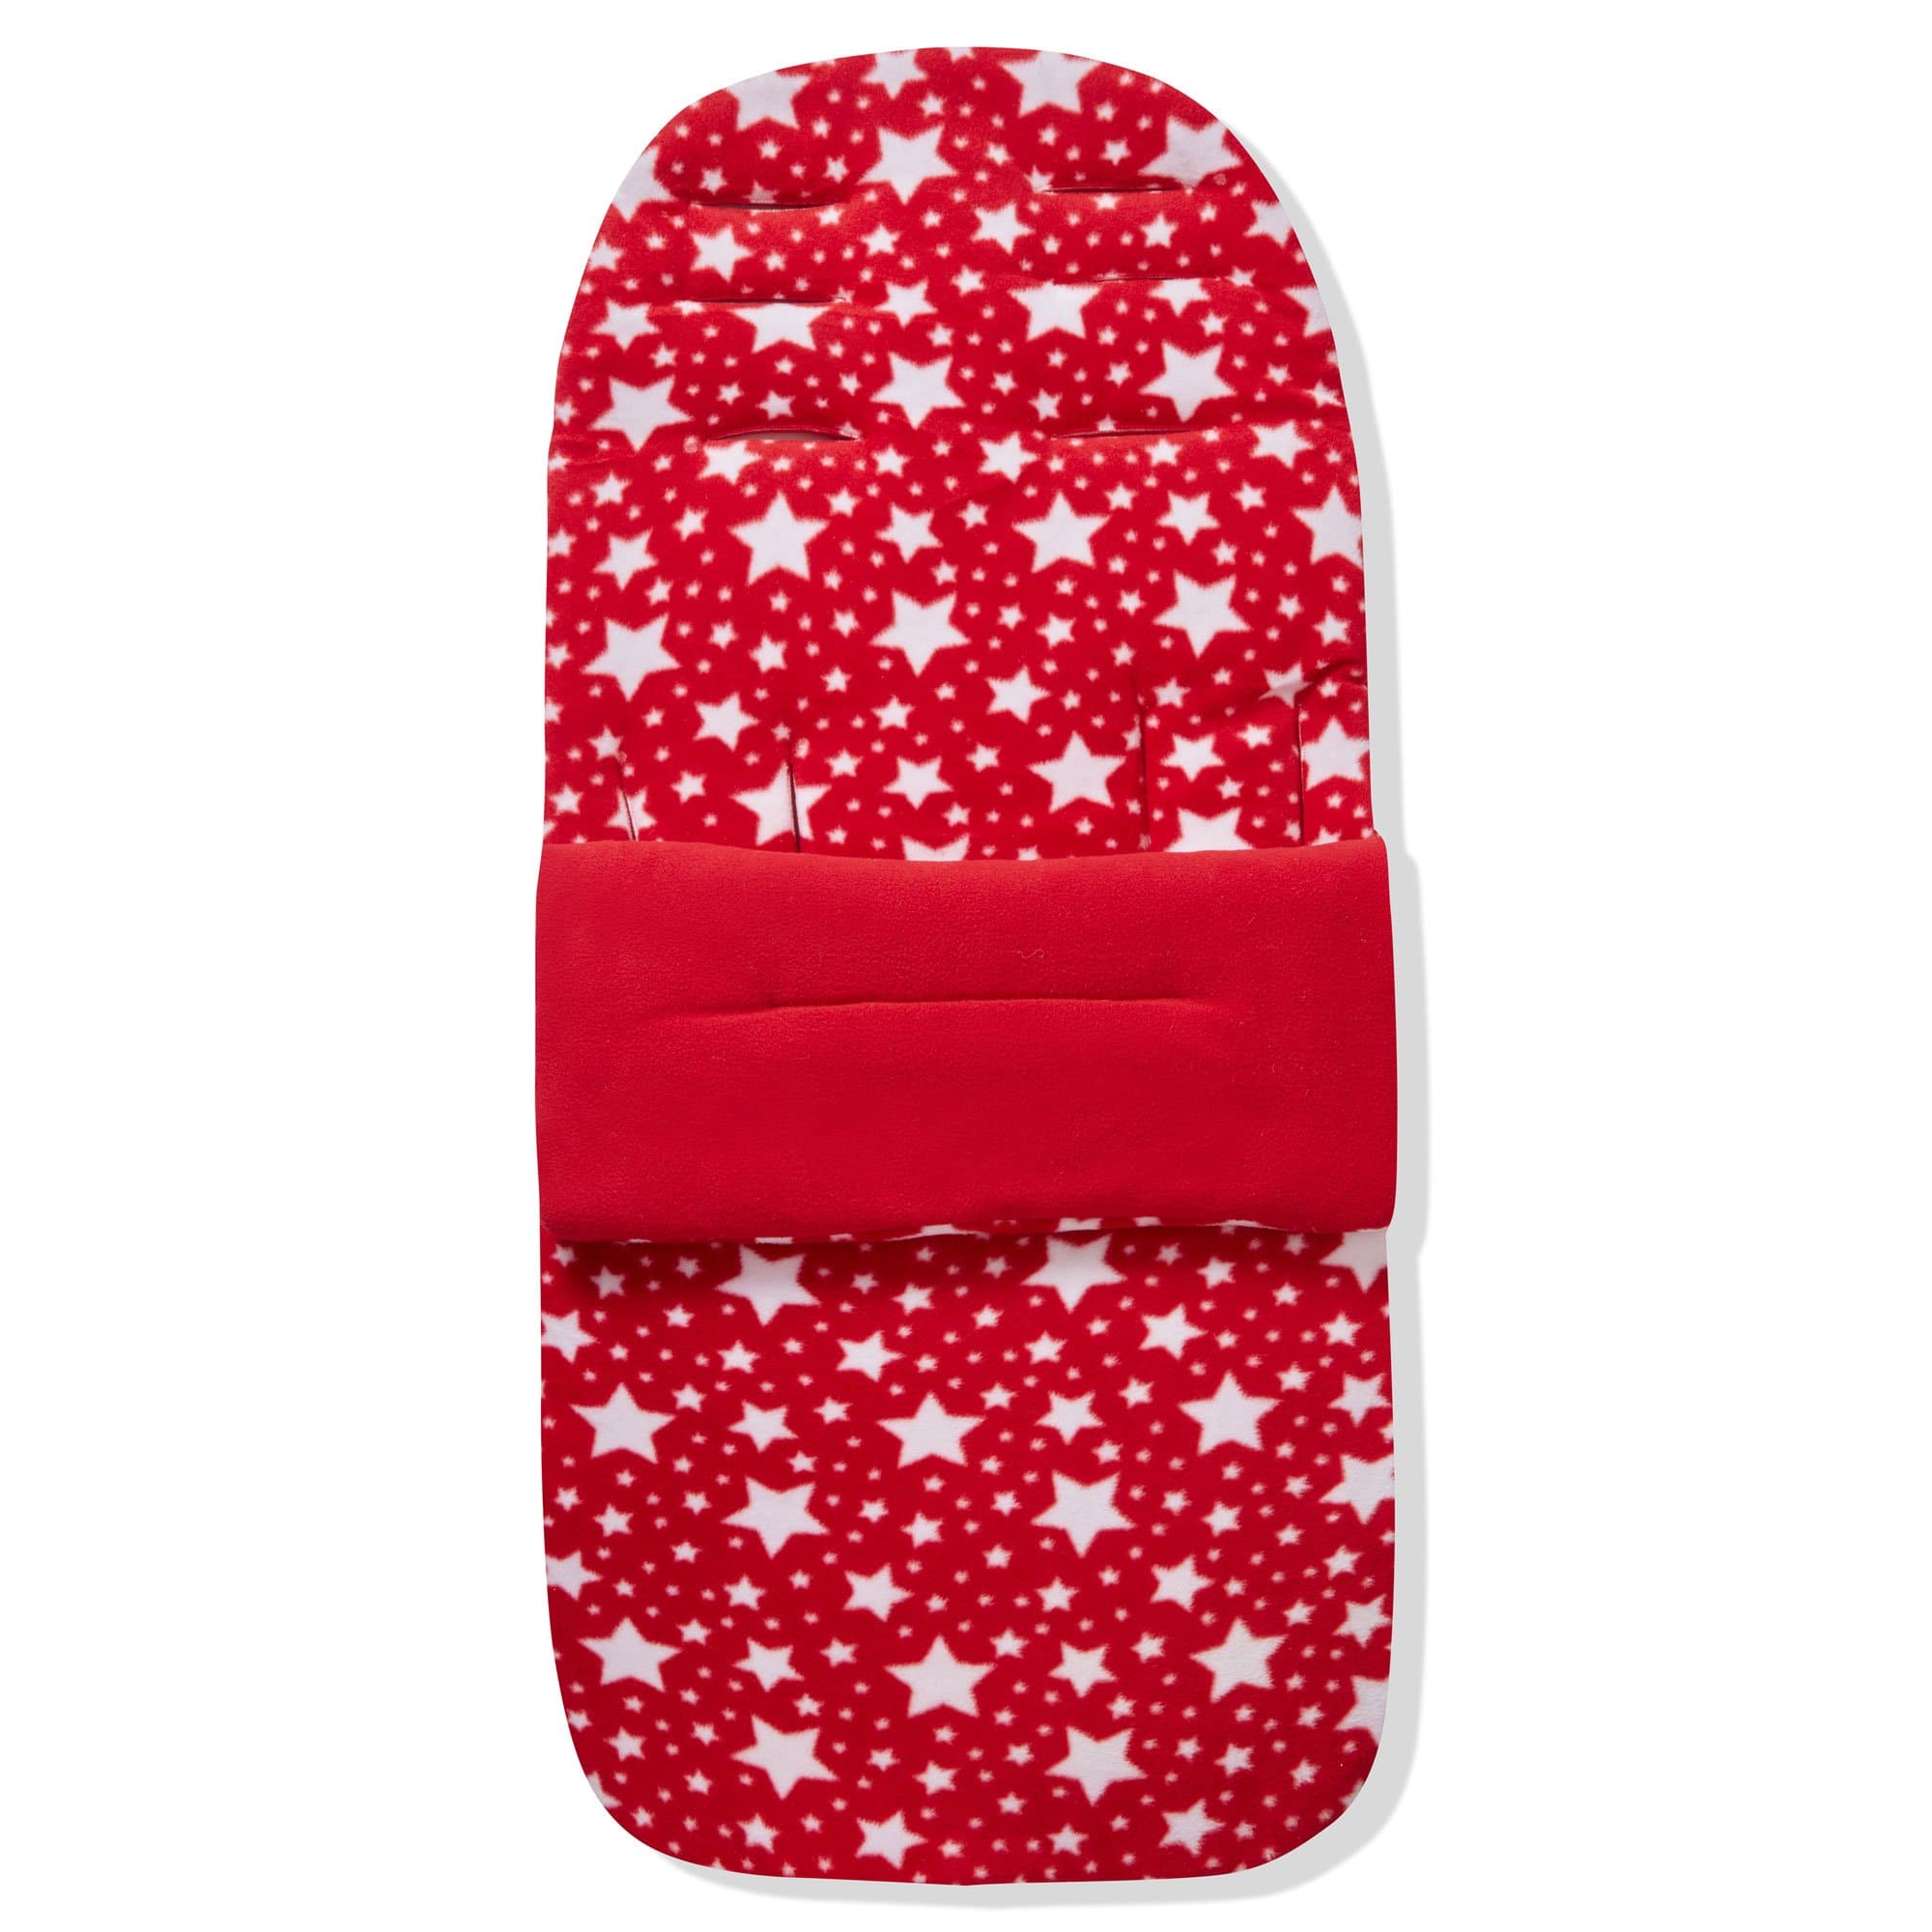 Fleece Footmuff / Cosy Toes Compatible with Formula - For Your Little One